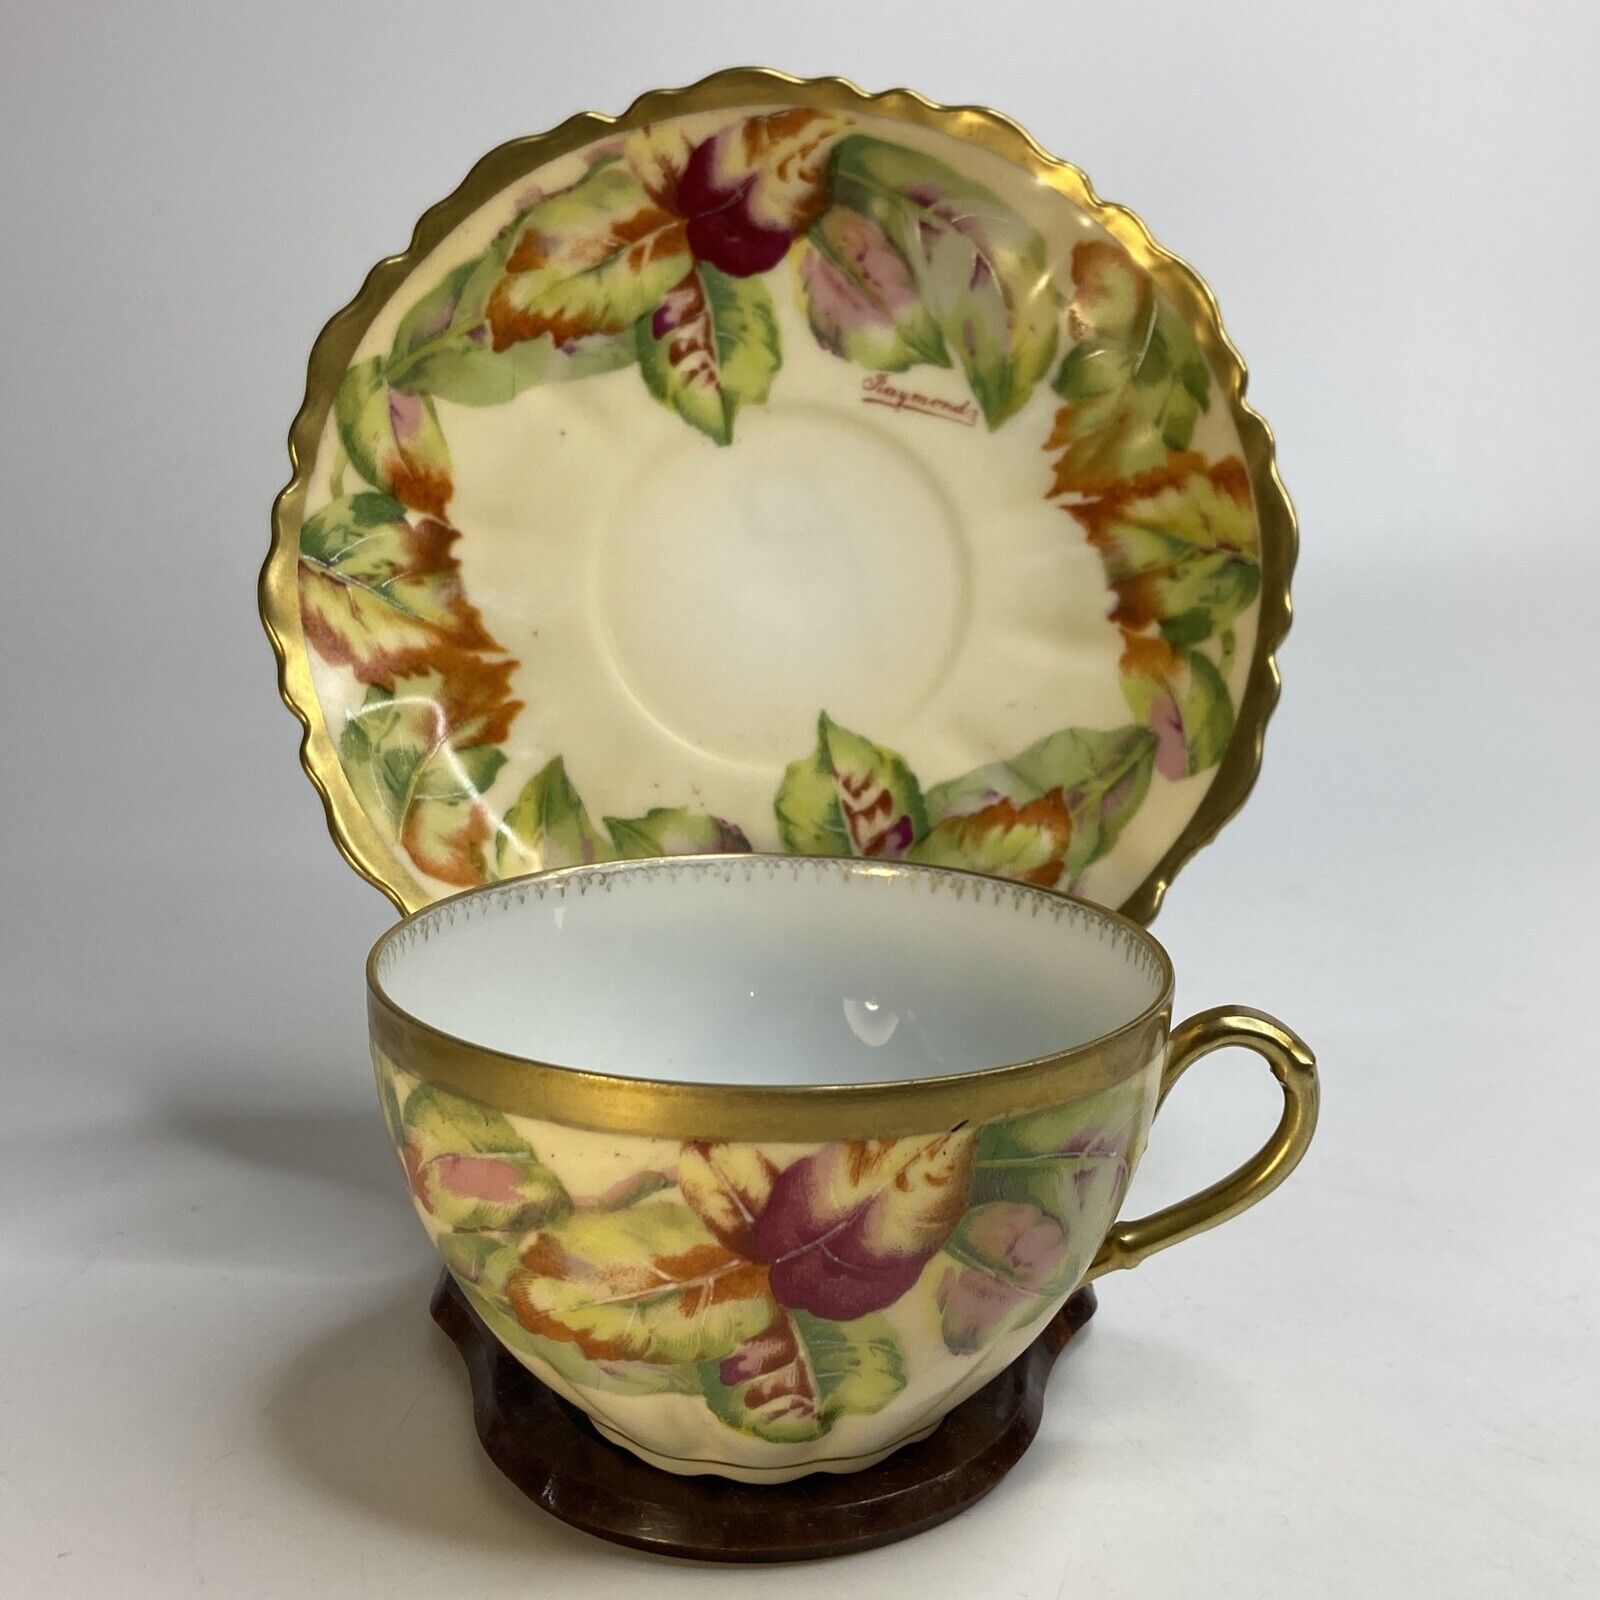 OE&G Royal Austria Tea Cup Saucer Set Signed Hand Painted Antique Fall Leaves